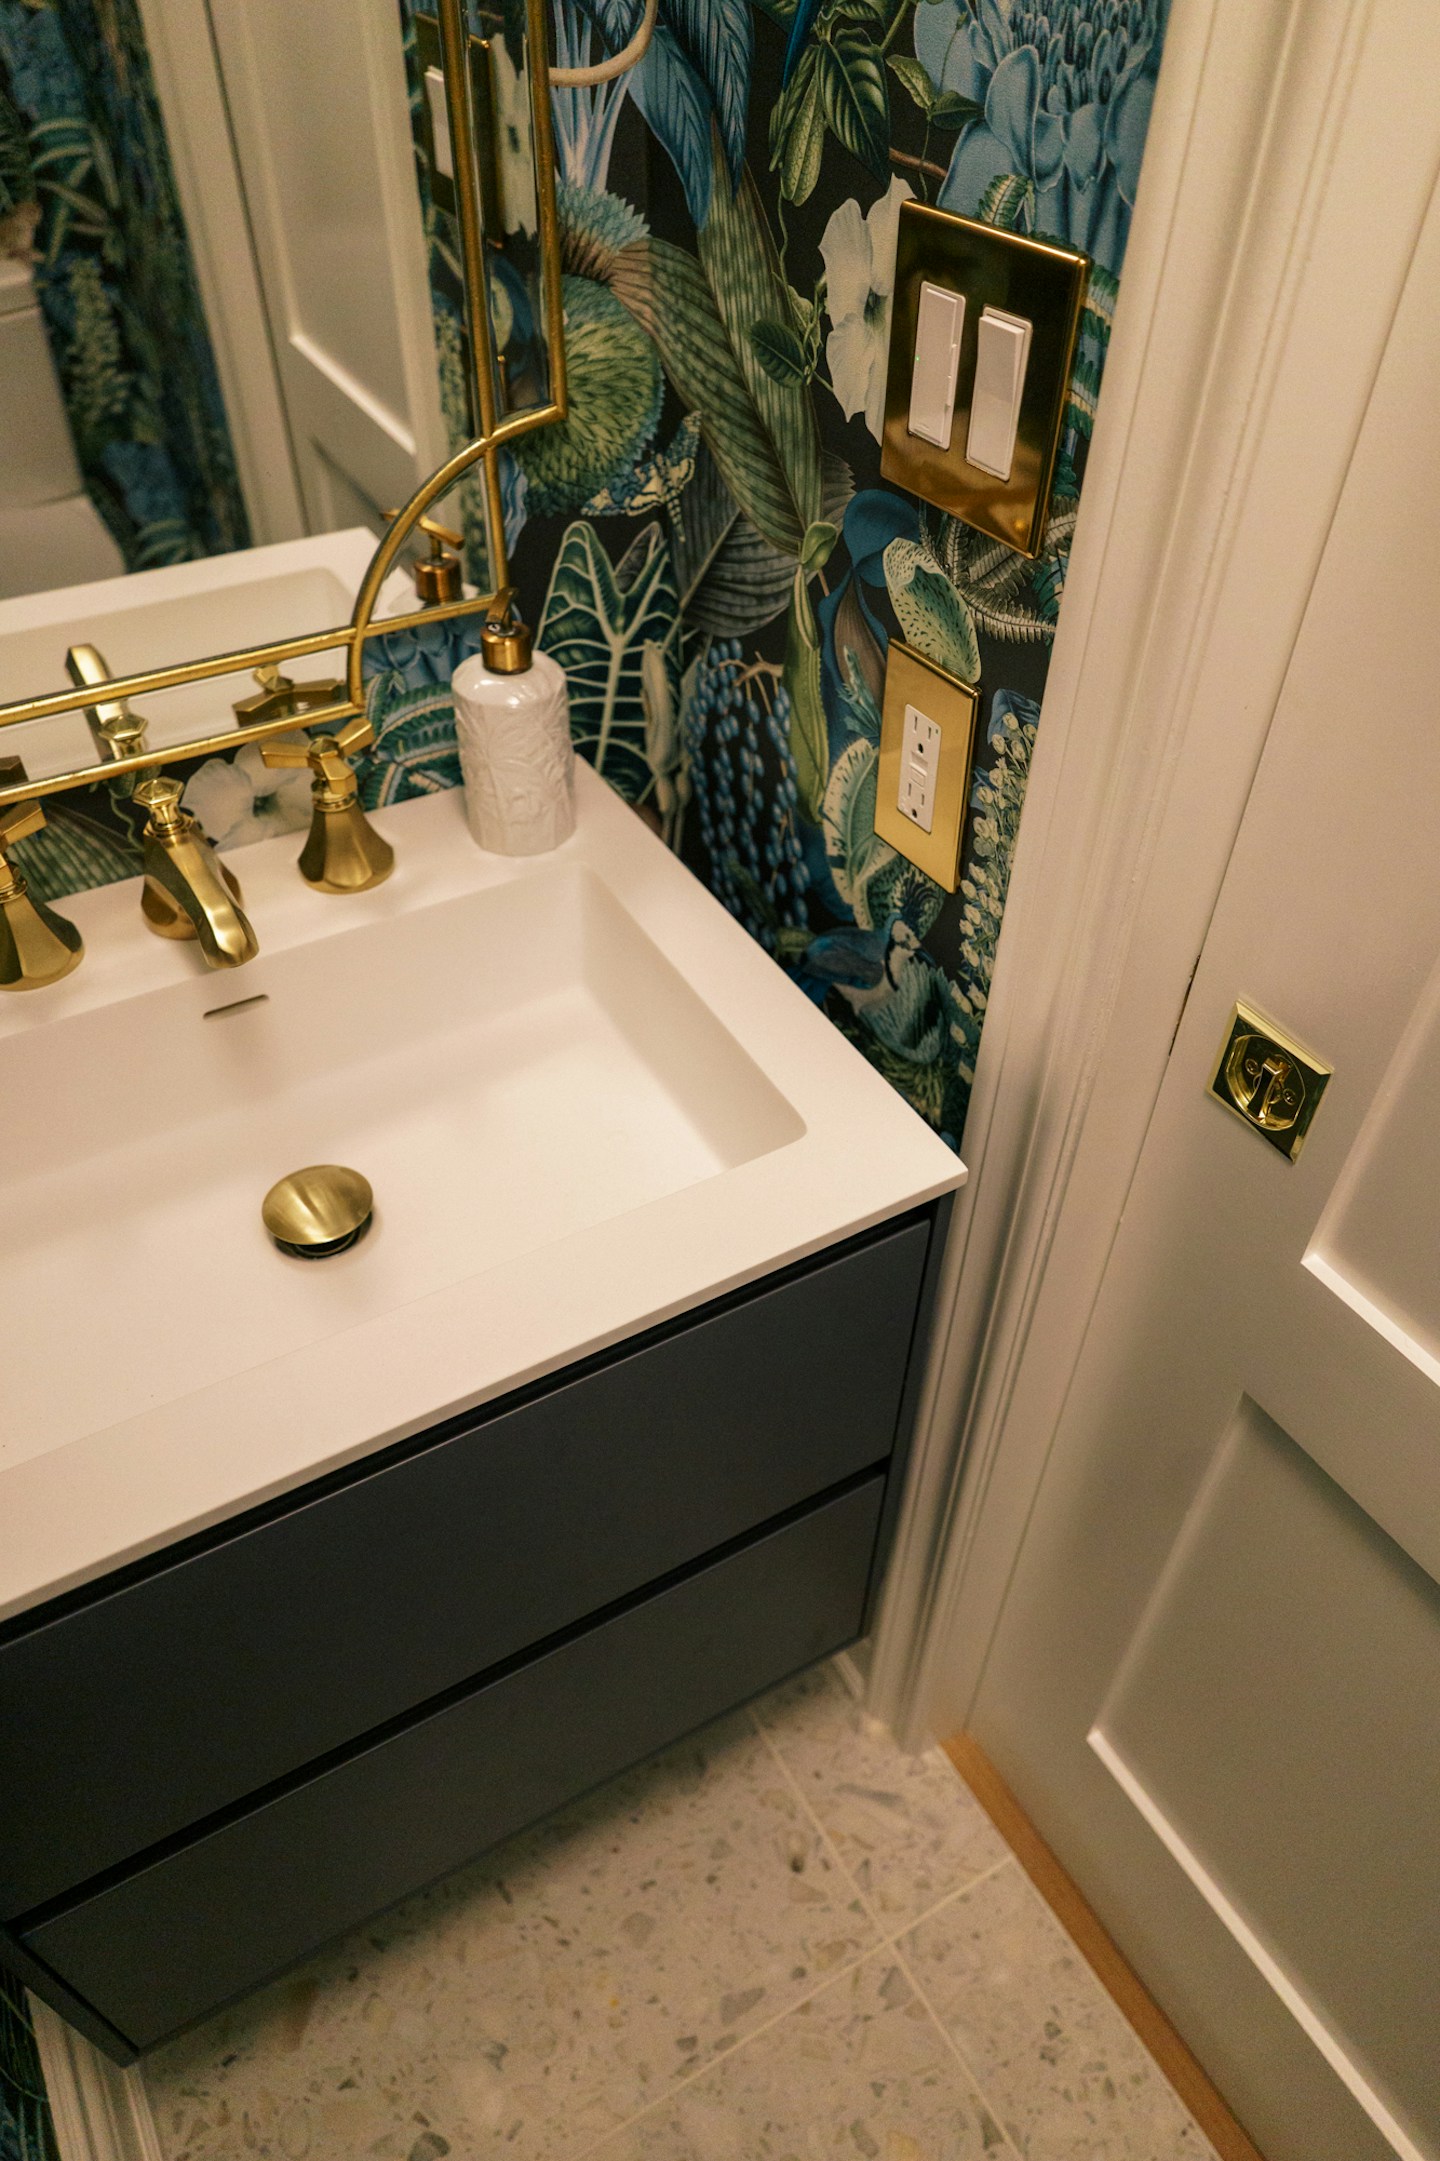 Adding brass fixtures to a bathroom elevates the look - don't forget the matching brass outlet and switchplates too.